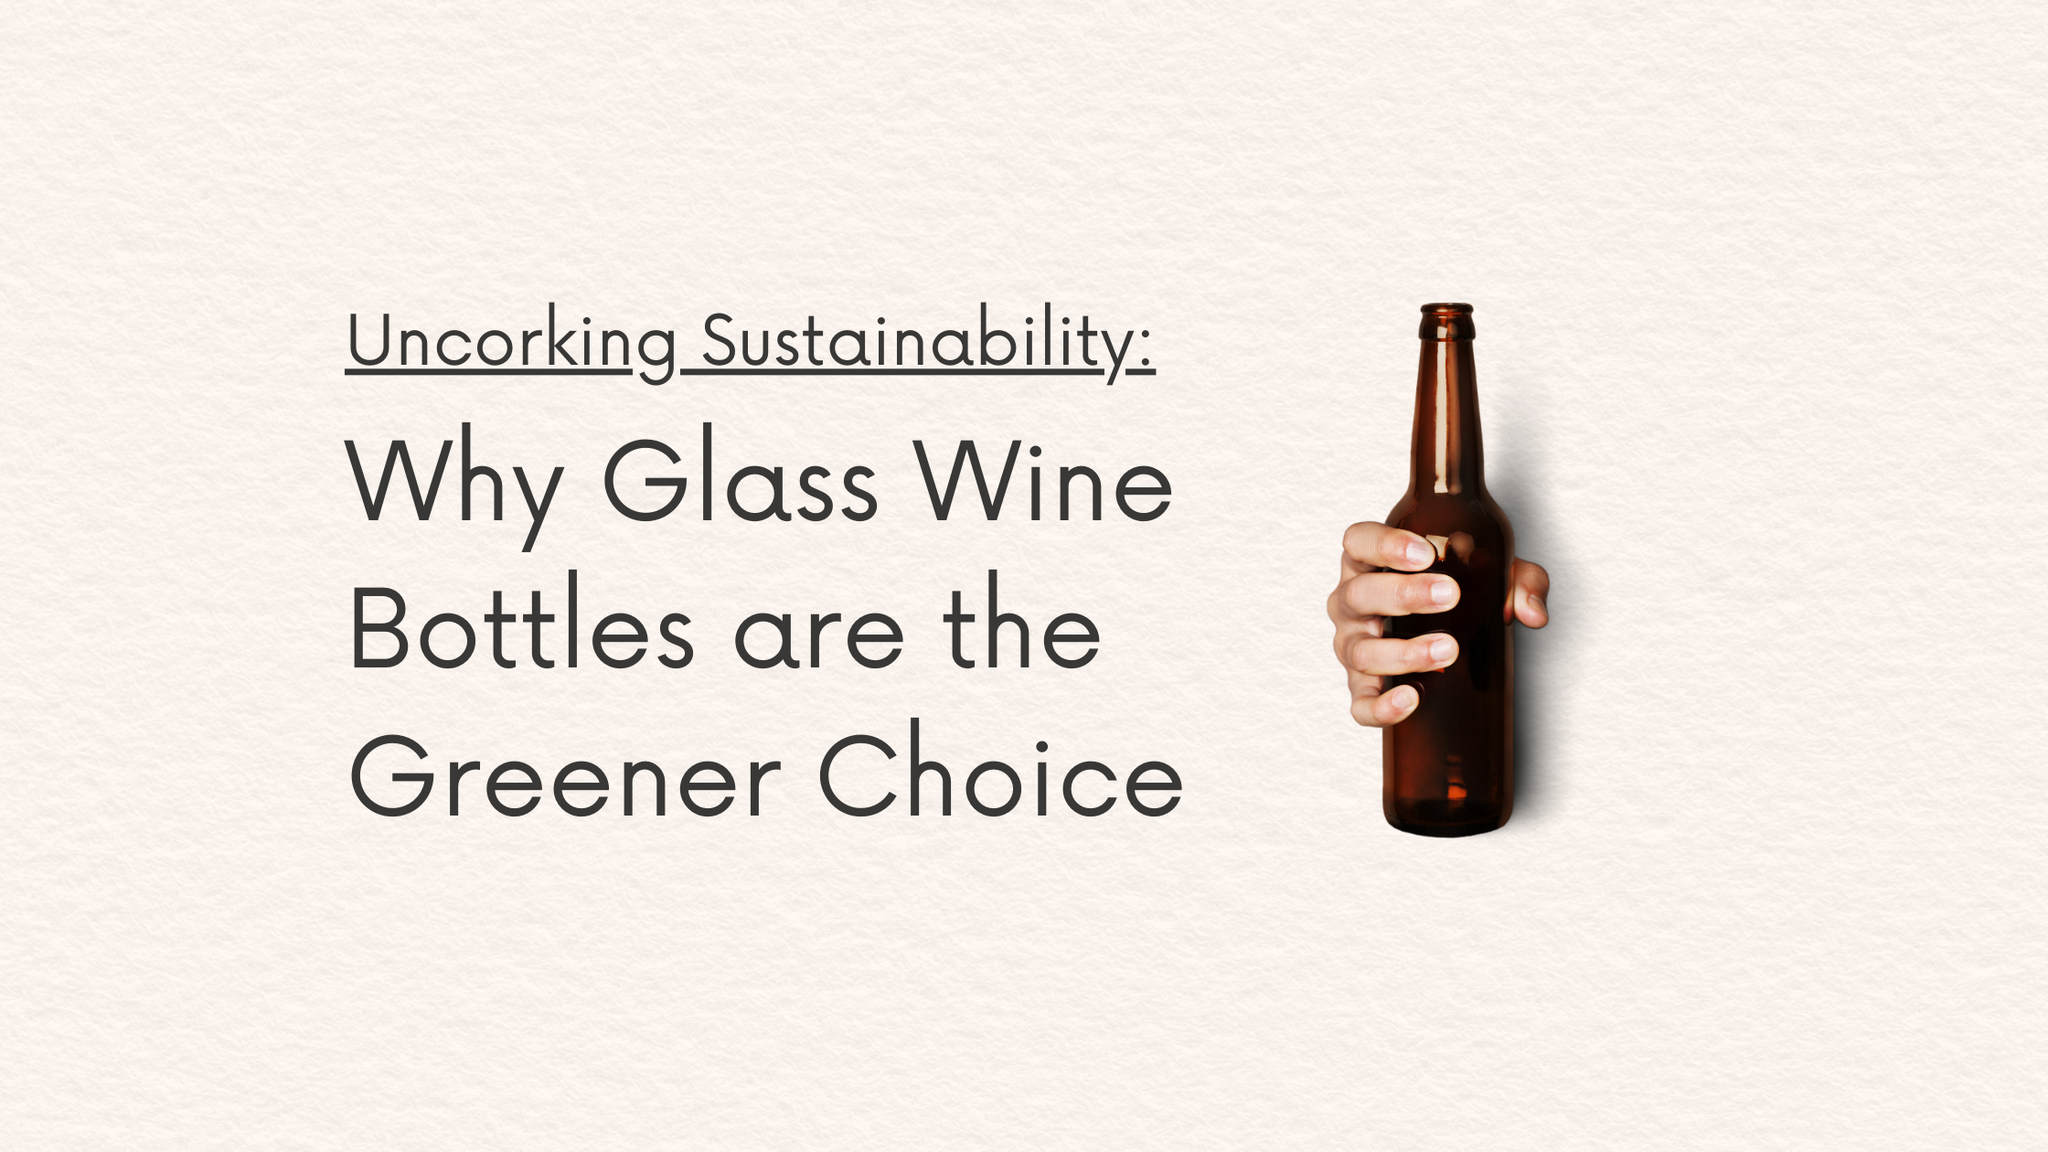 Uncorking Sustainability: Why Glass Wine Bottles are the Greener Choice